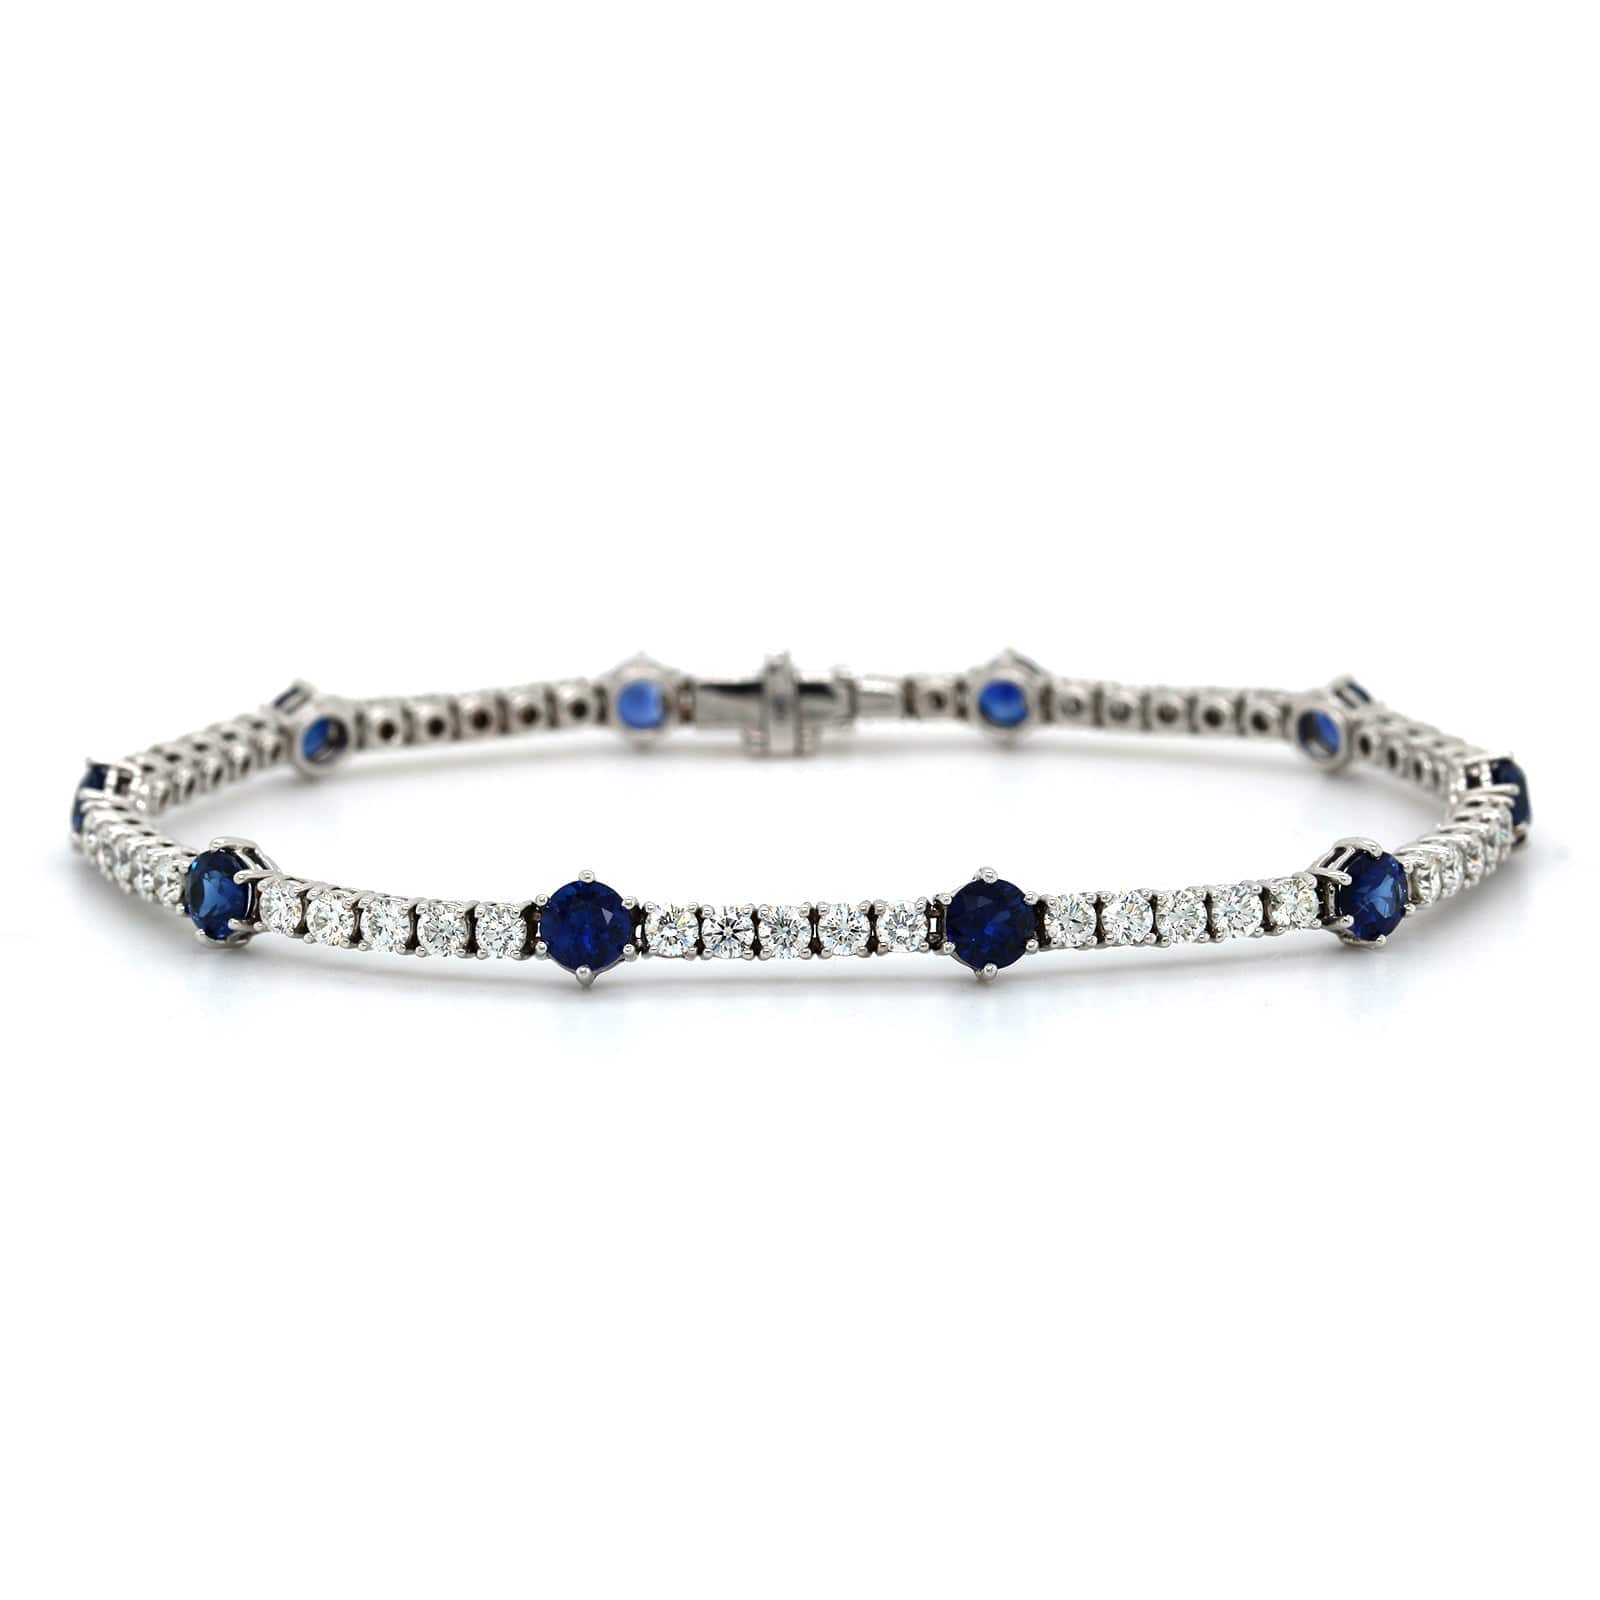 Lab-Created Sapphire Bracelet Round Sterling Silver | Jared